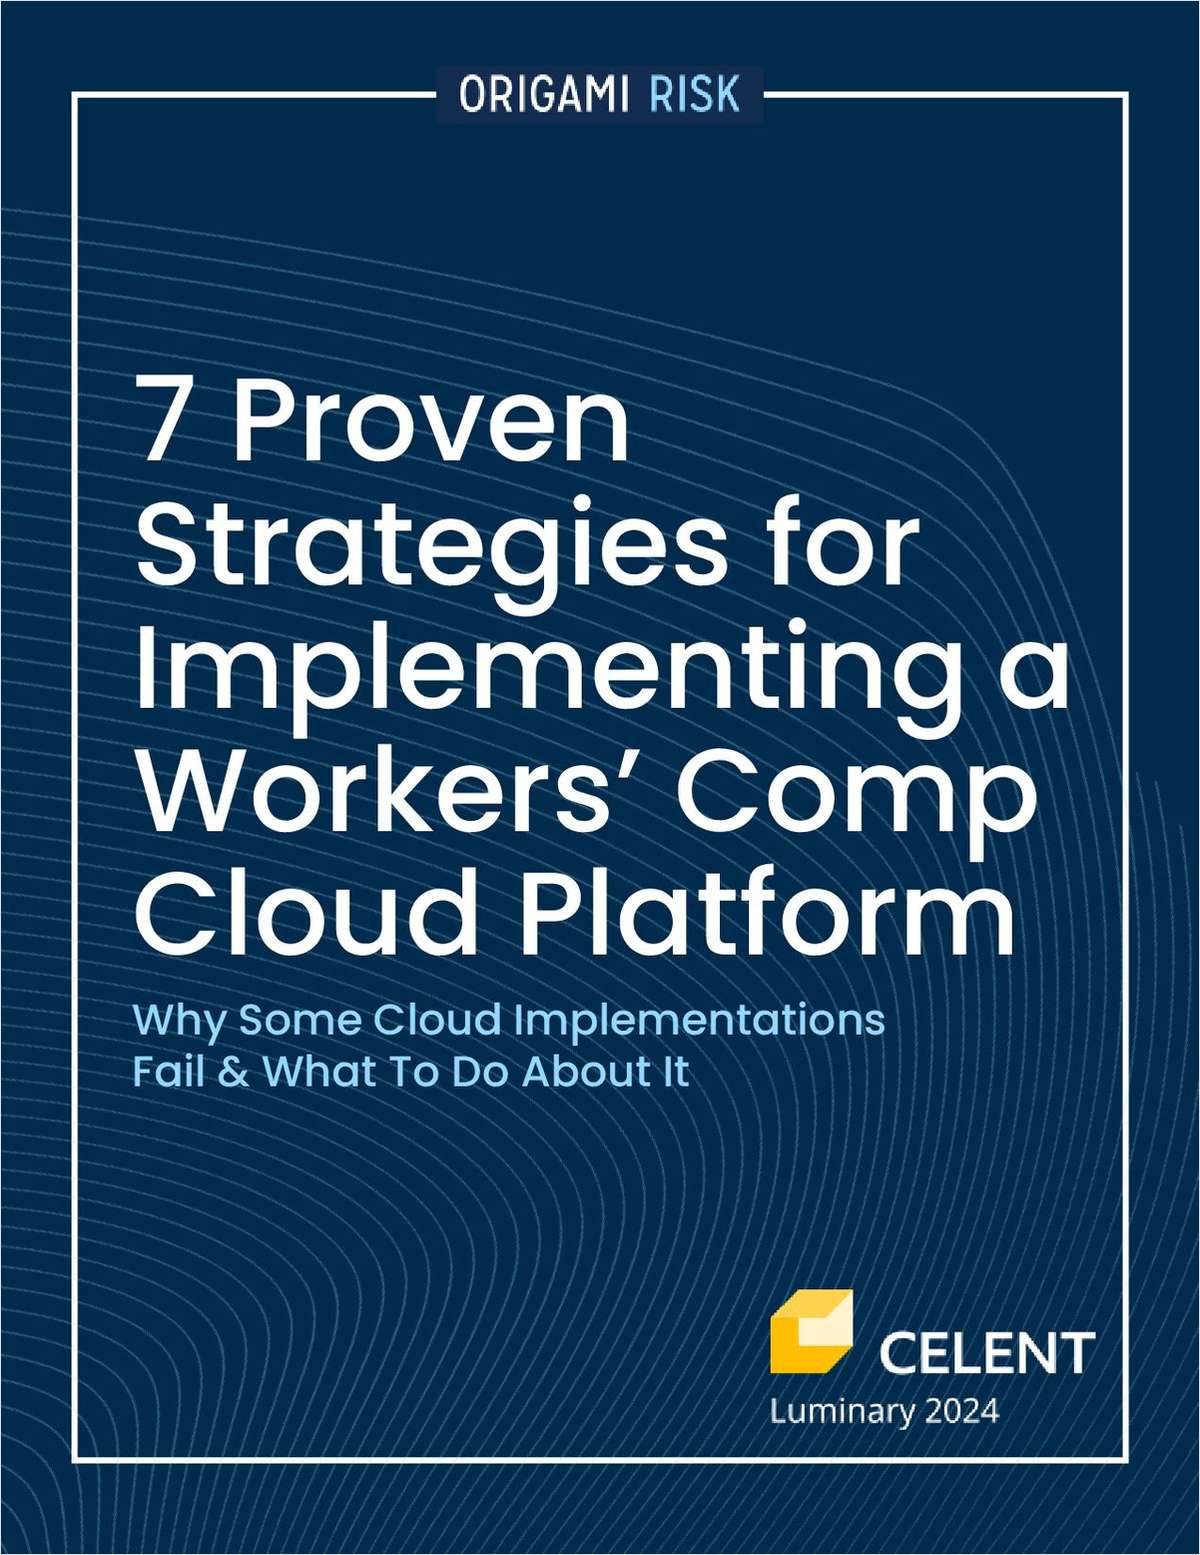 7 Proven Strategies for Implementing a Workers' Comp Cloud Platform link